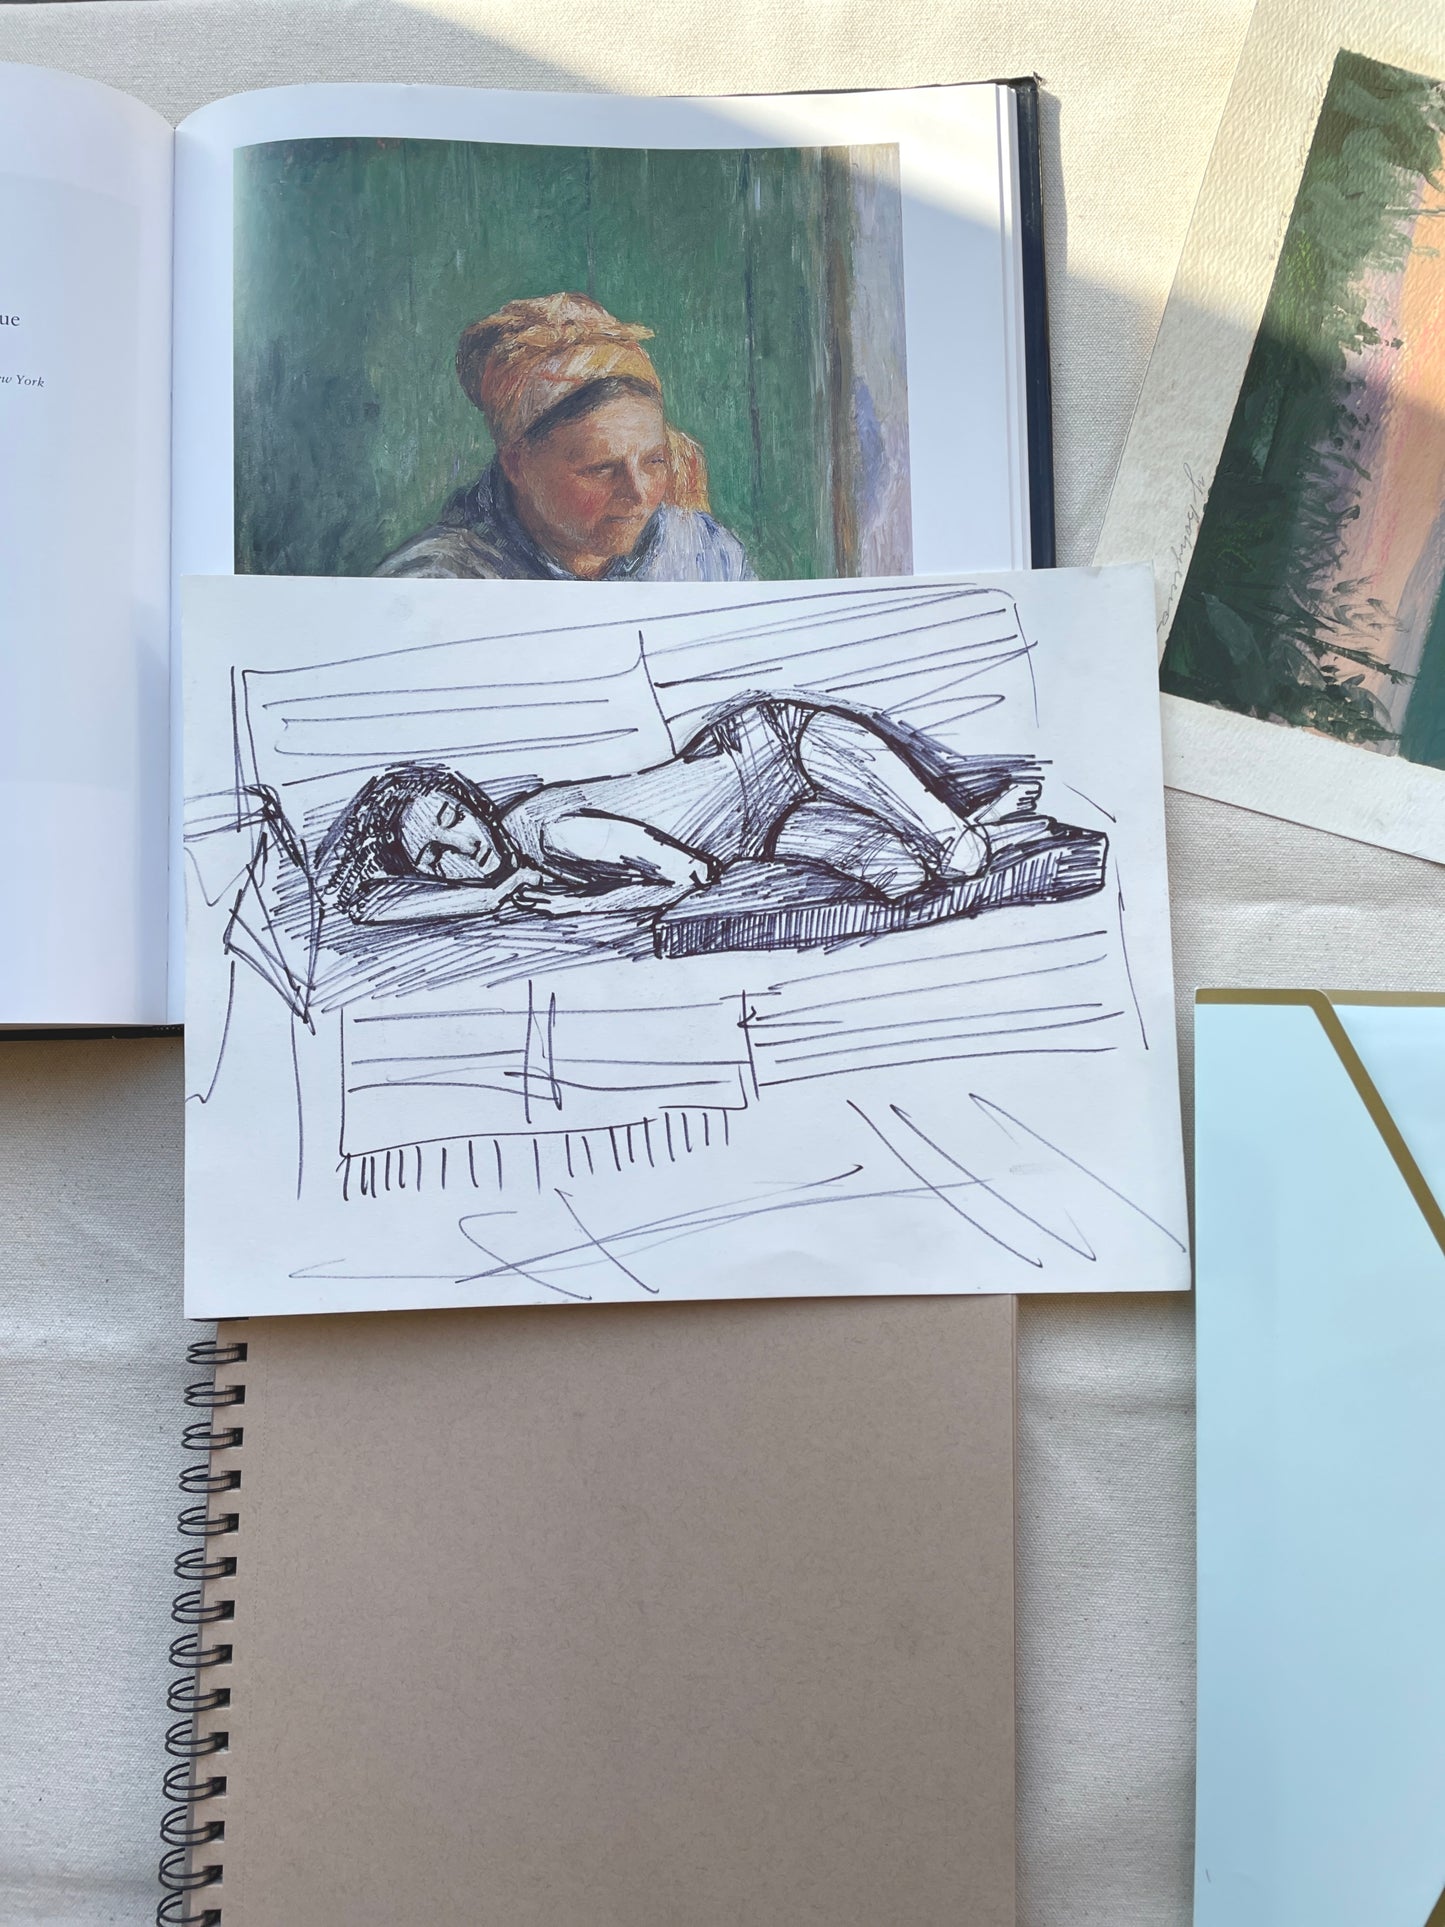 A fast gesture drawing of a sleeping woman on a couch